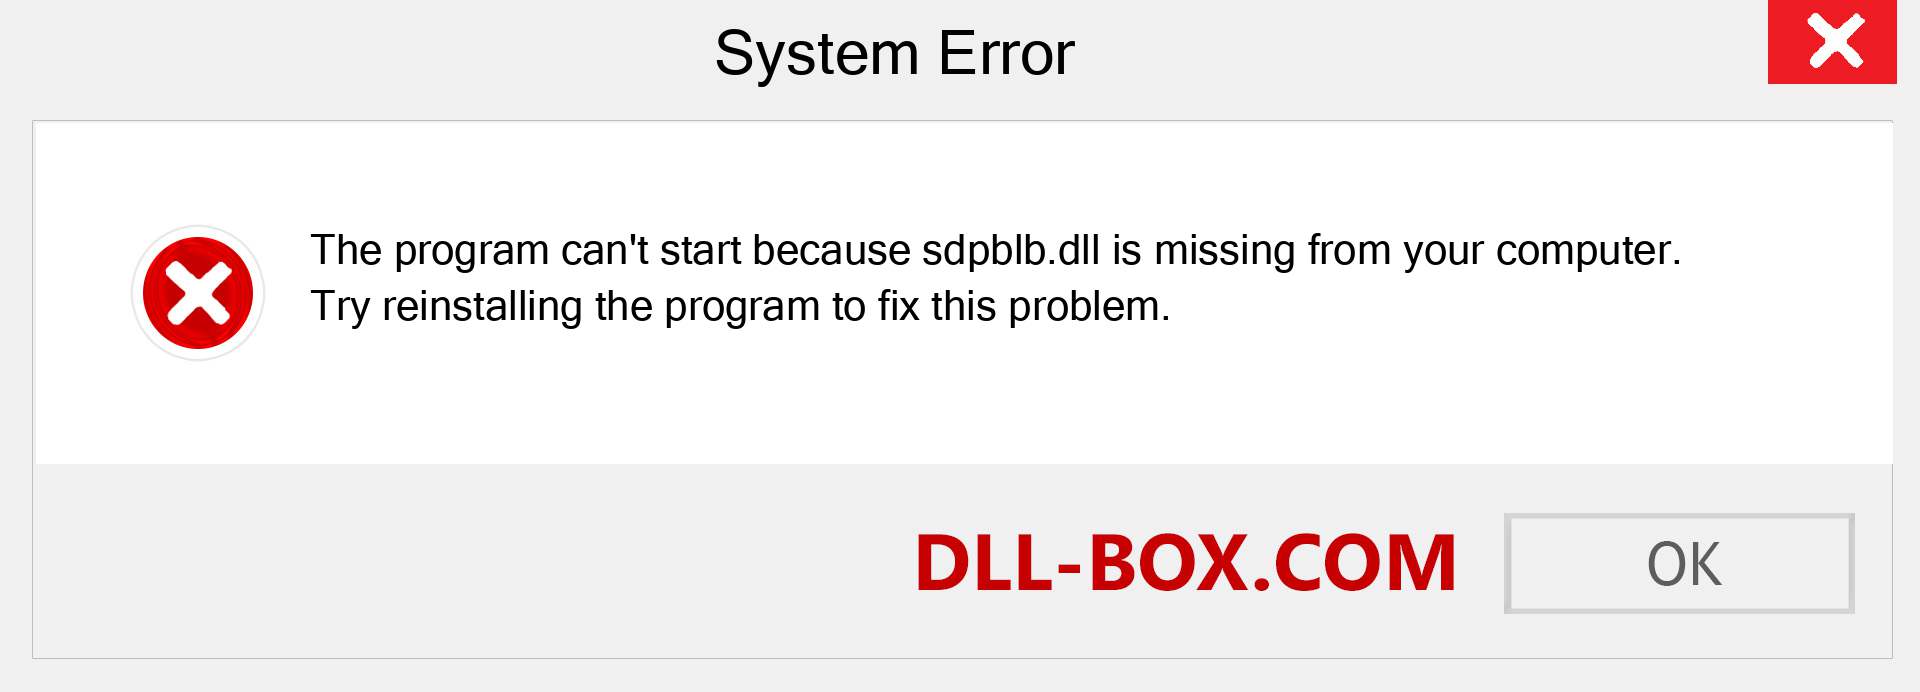  sdpblb.dll file is missing?. Download for Windows 7, 8, 10 - Fix  sdpblb dll Missing Error on Windows, photos, images